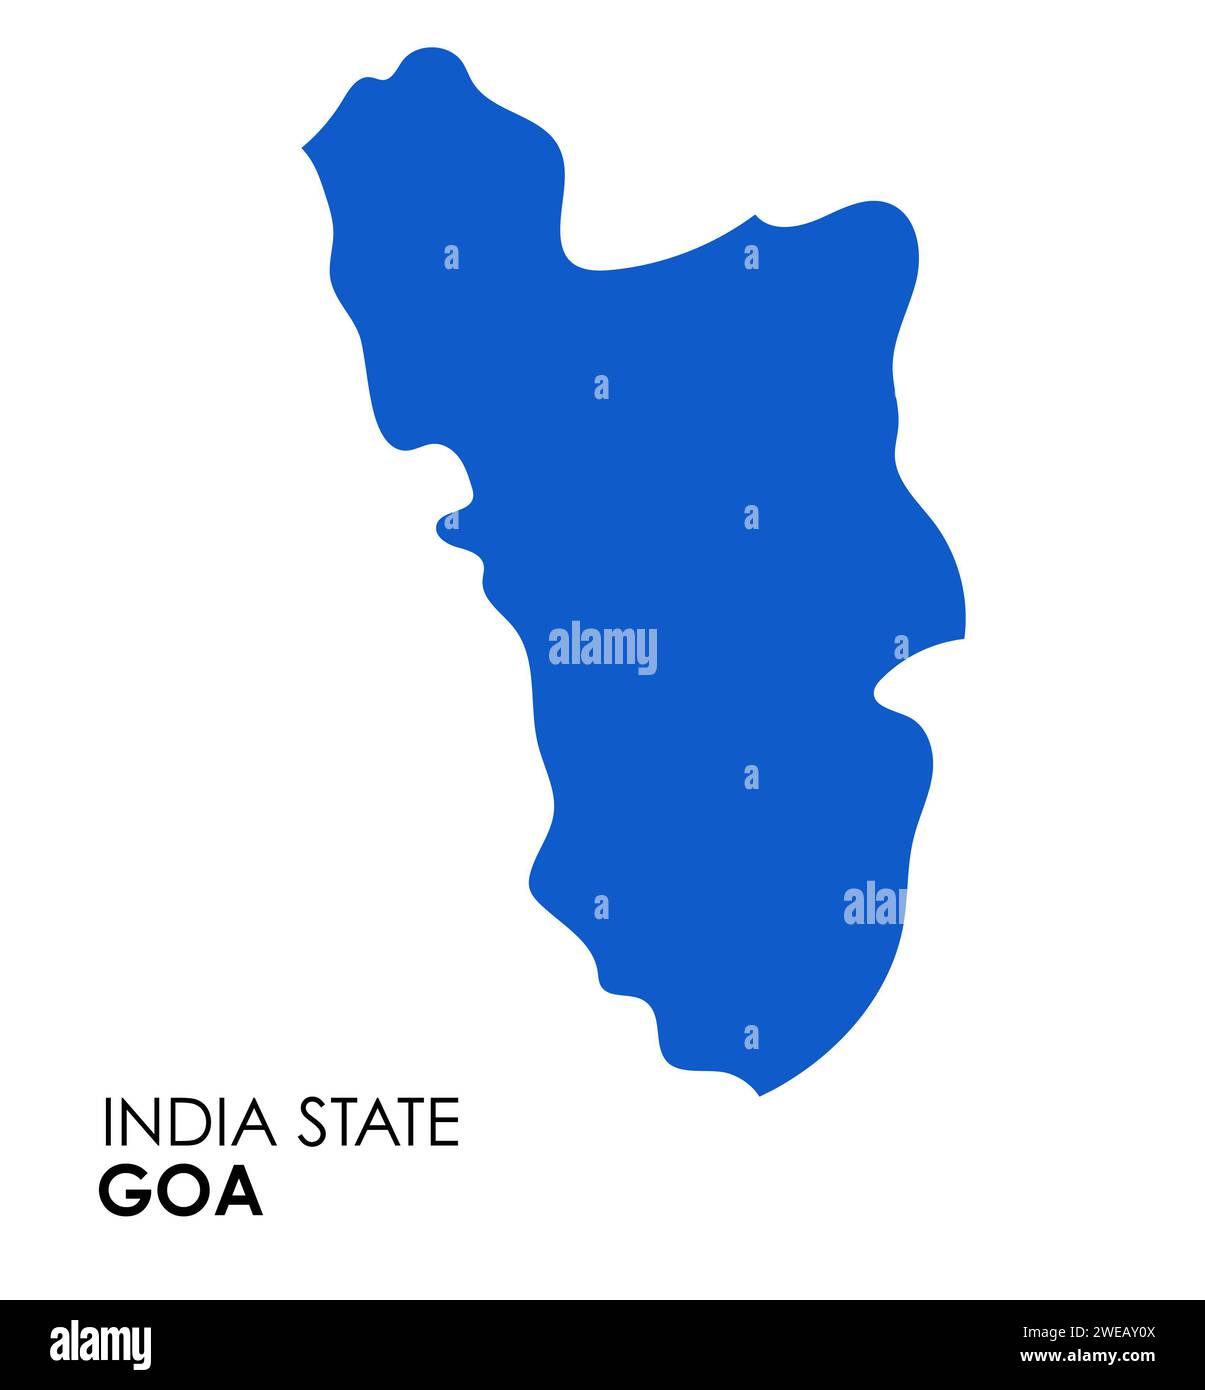 Goa map of Indian state. Goa map vector illustration. Goa vector map on white background. Stock Photo